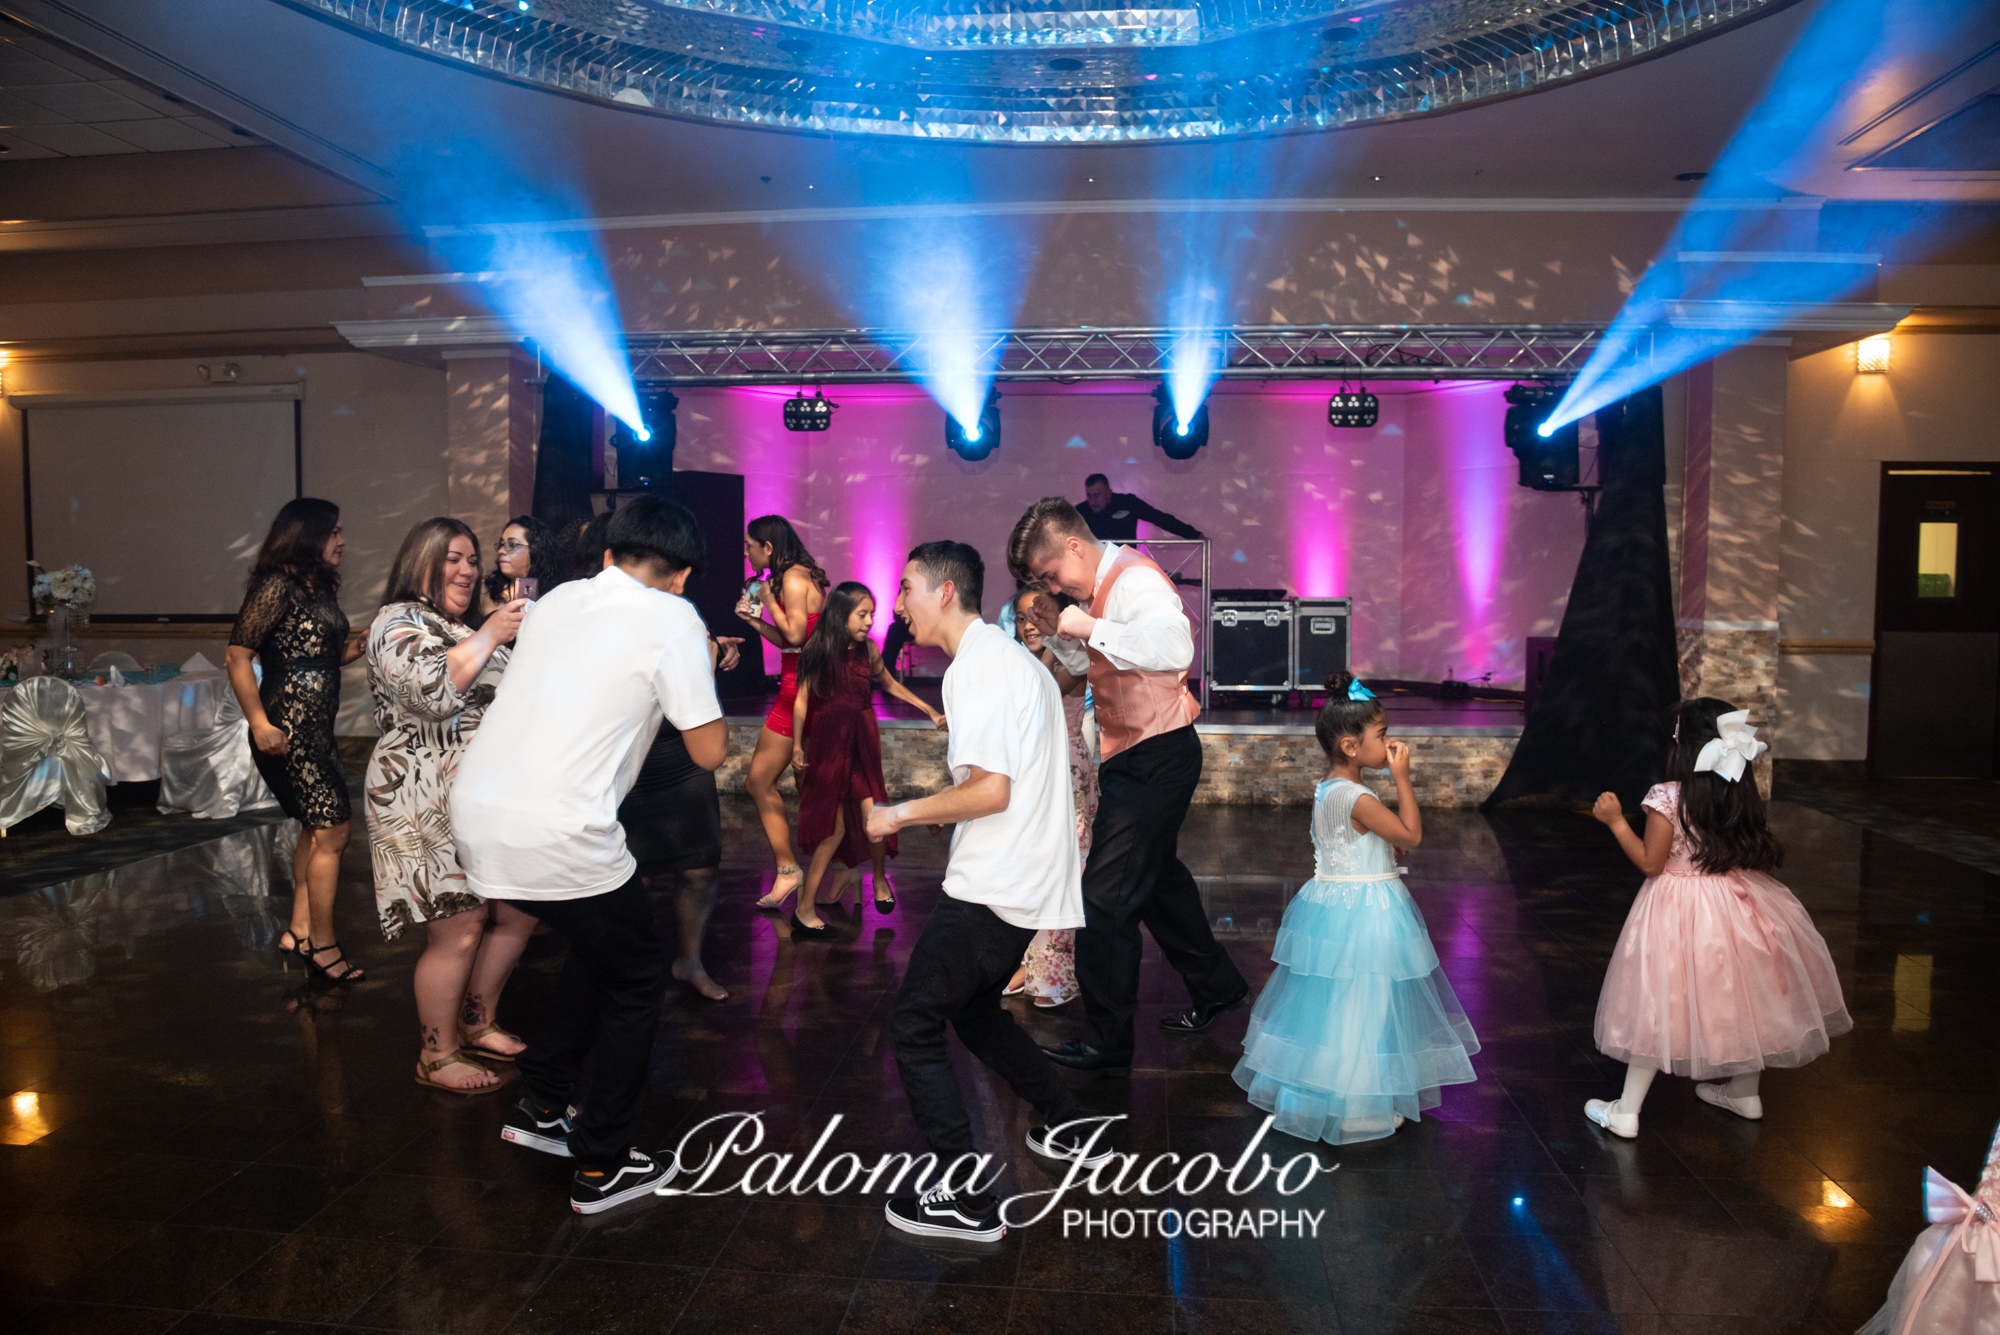 San Diego Quinceanera Party at Cristal Ballroom by Paloma Jacobo Photography